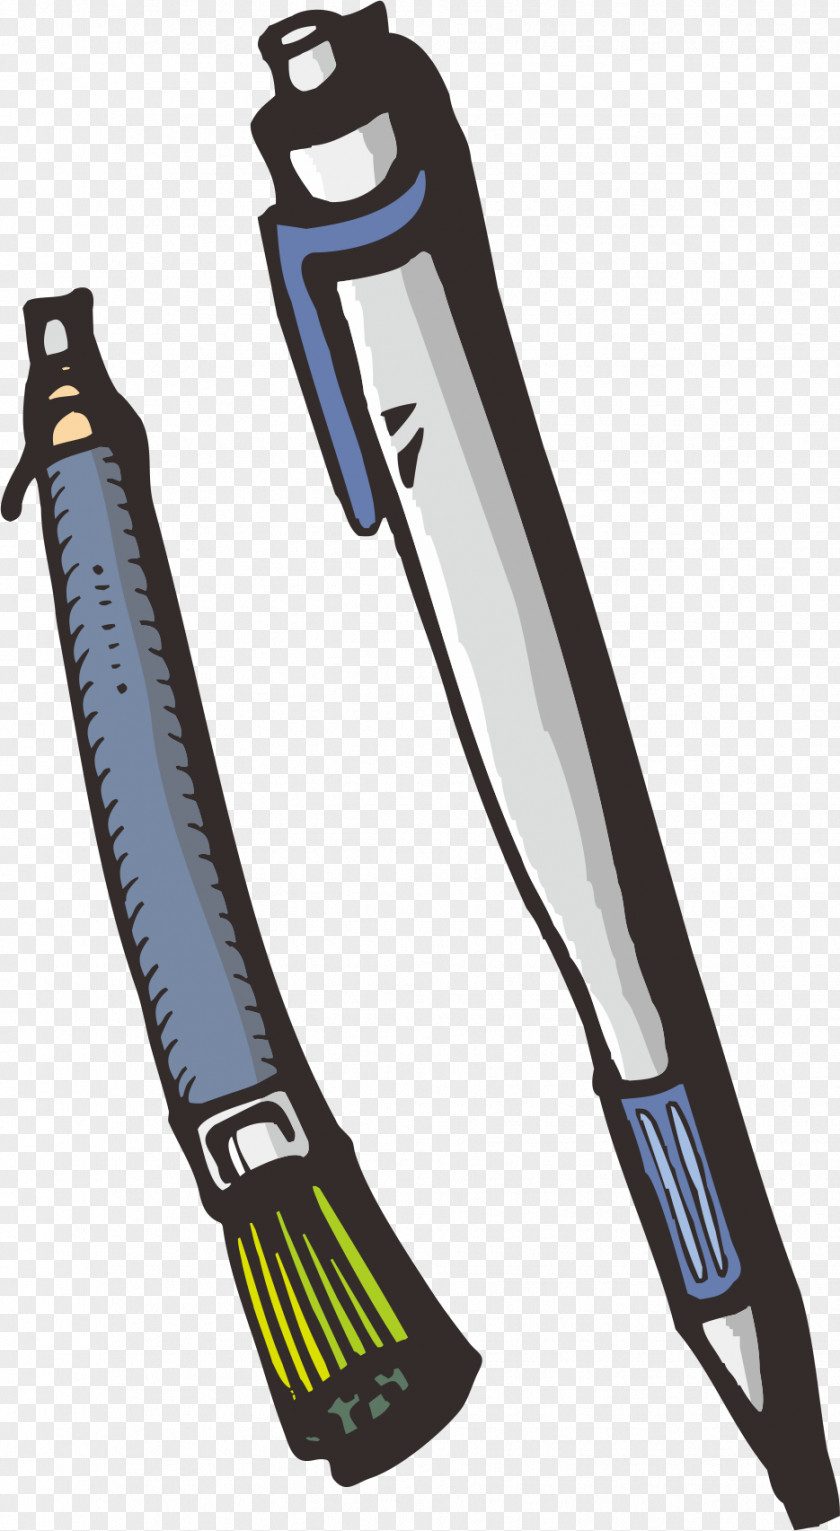 Pen Vector Material Pencil Stationery PNG